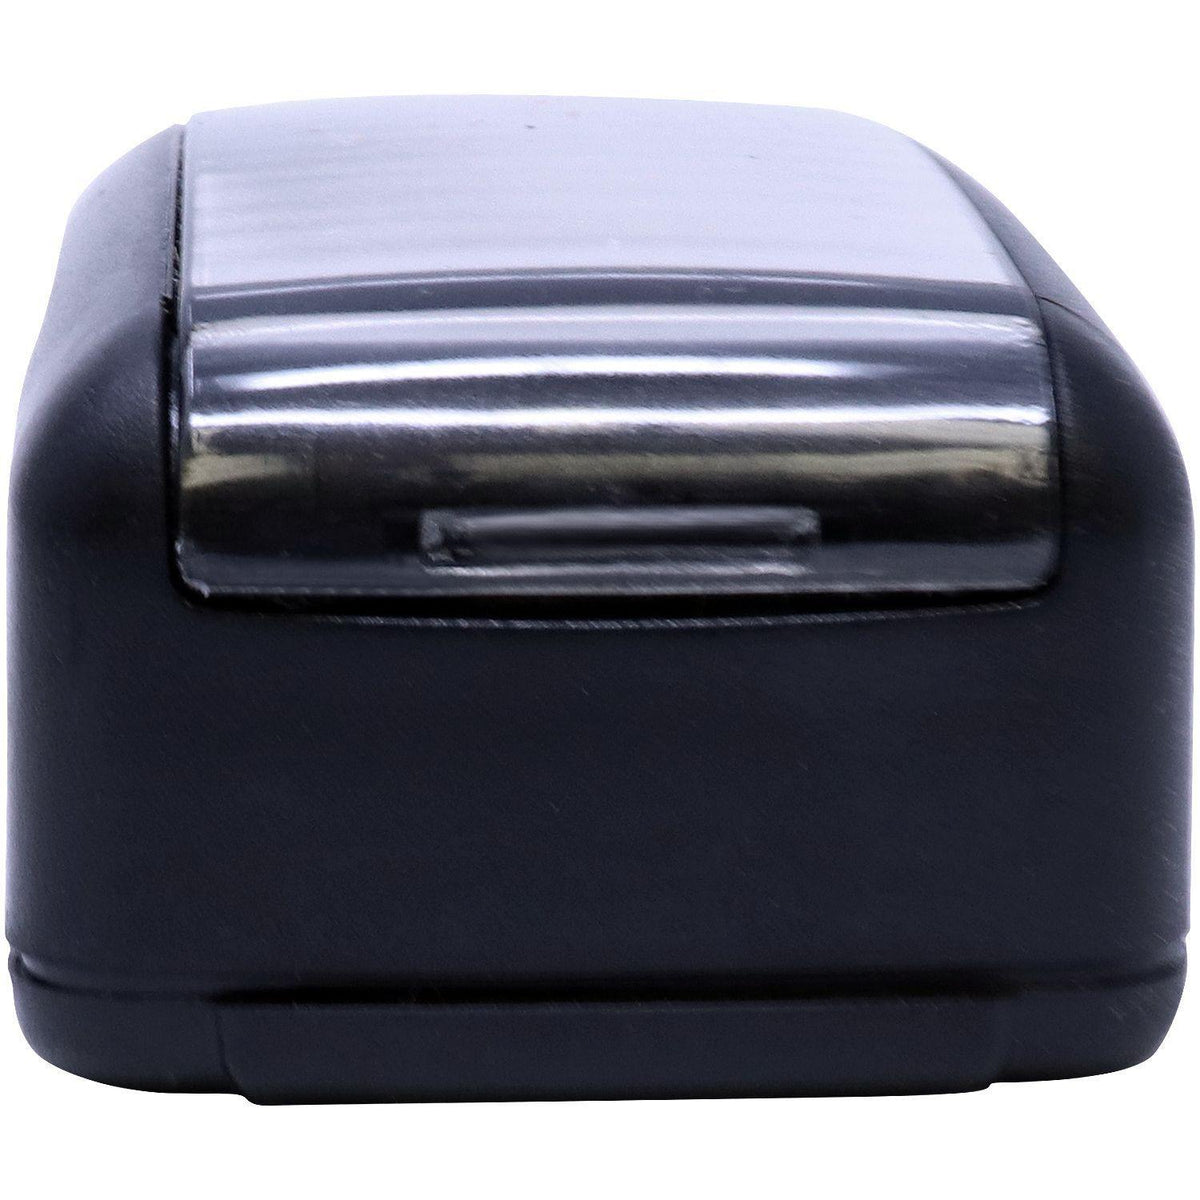 Large Pre-Inked Italic Personal Confidential Stamp Side View